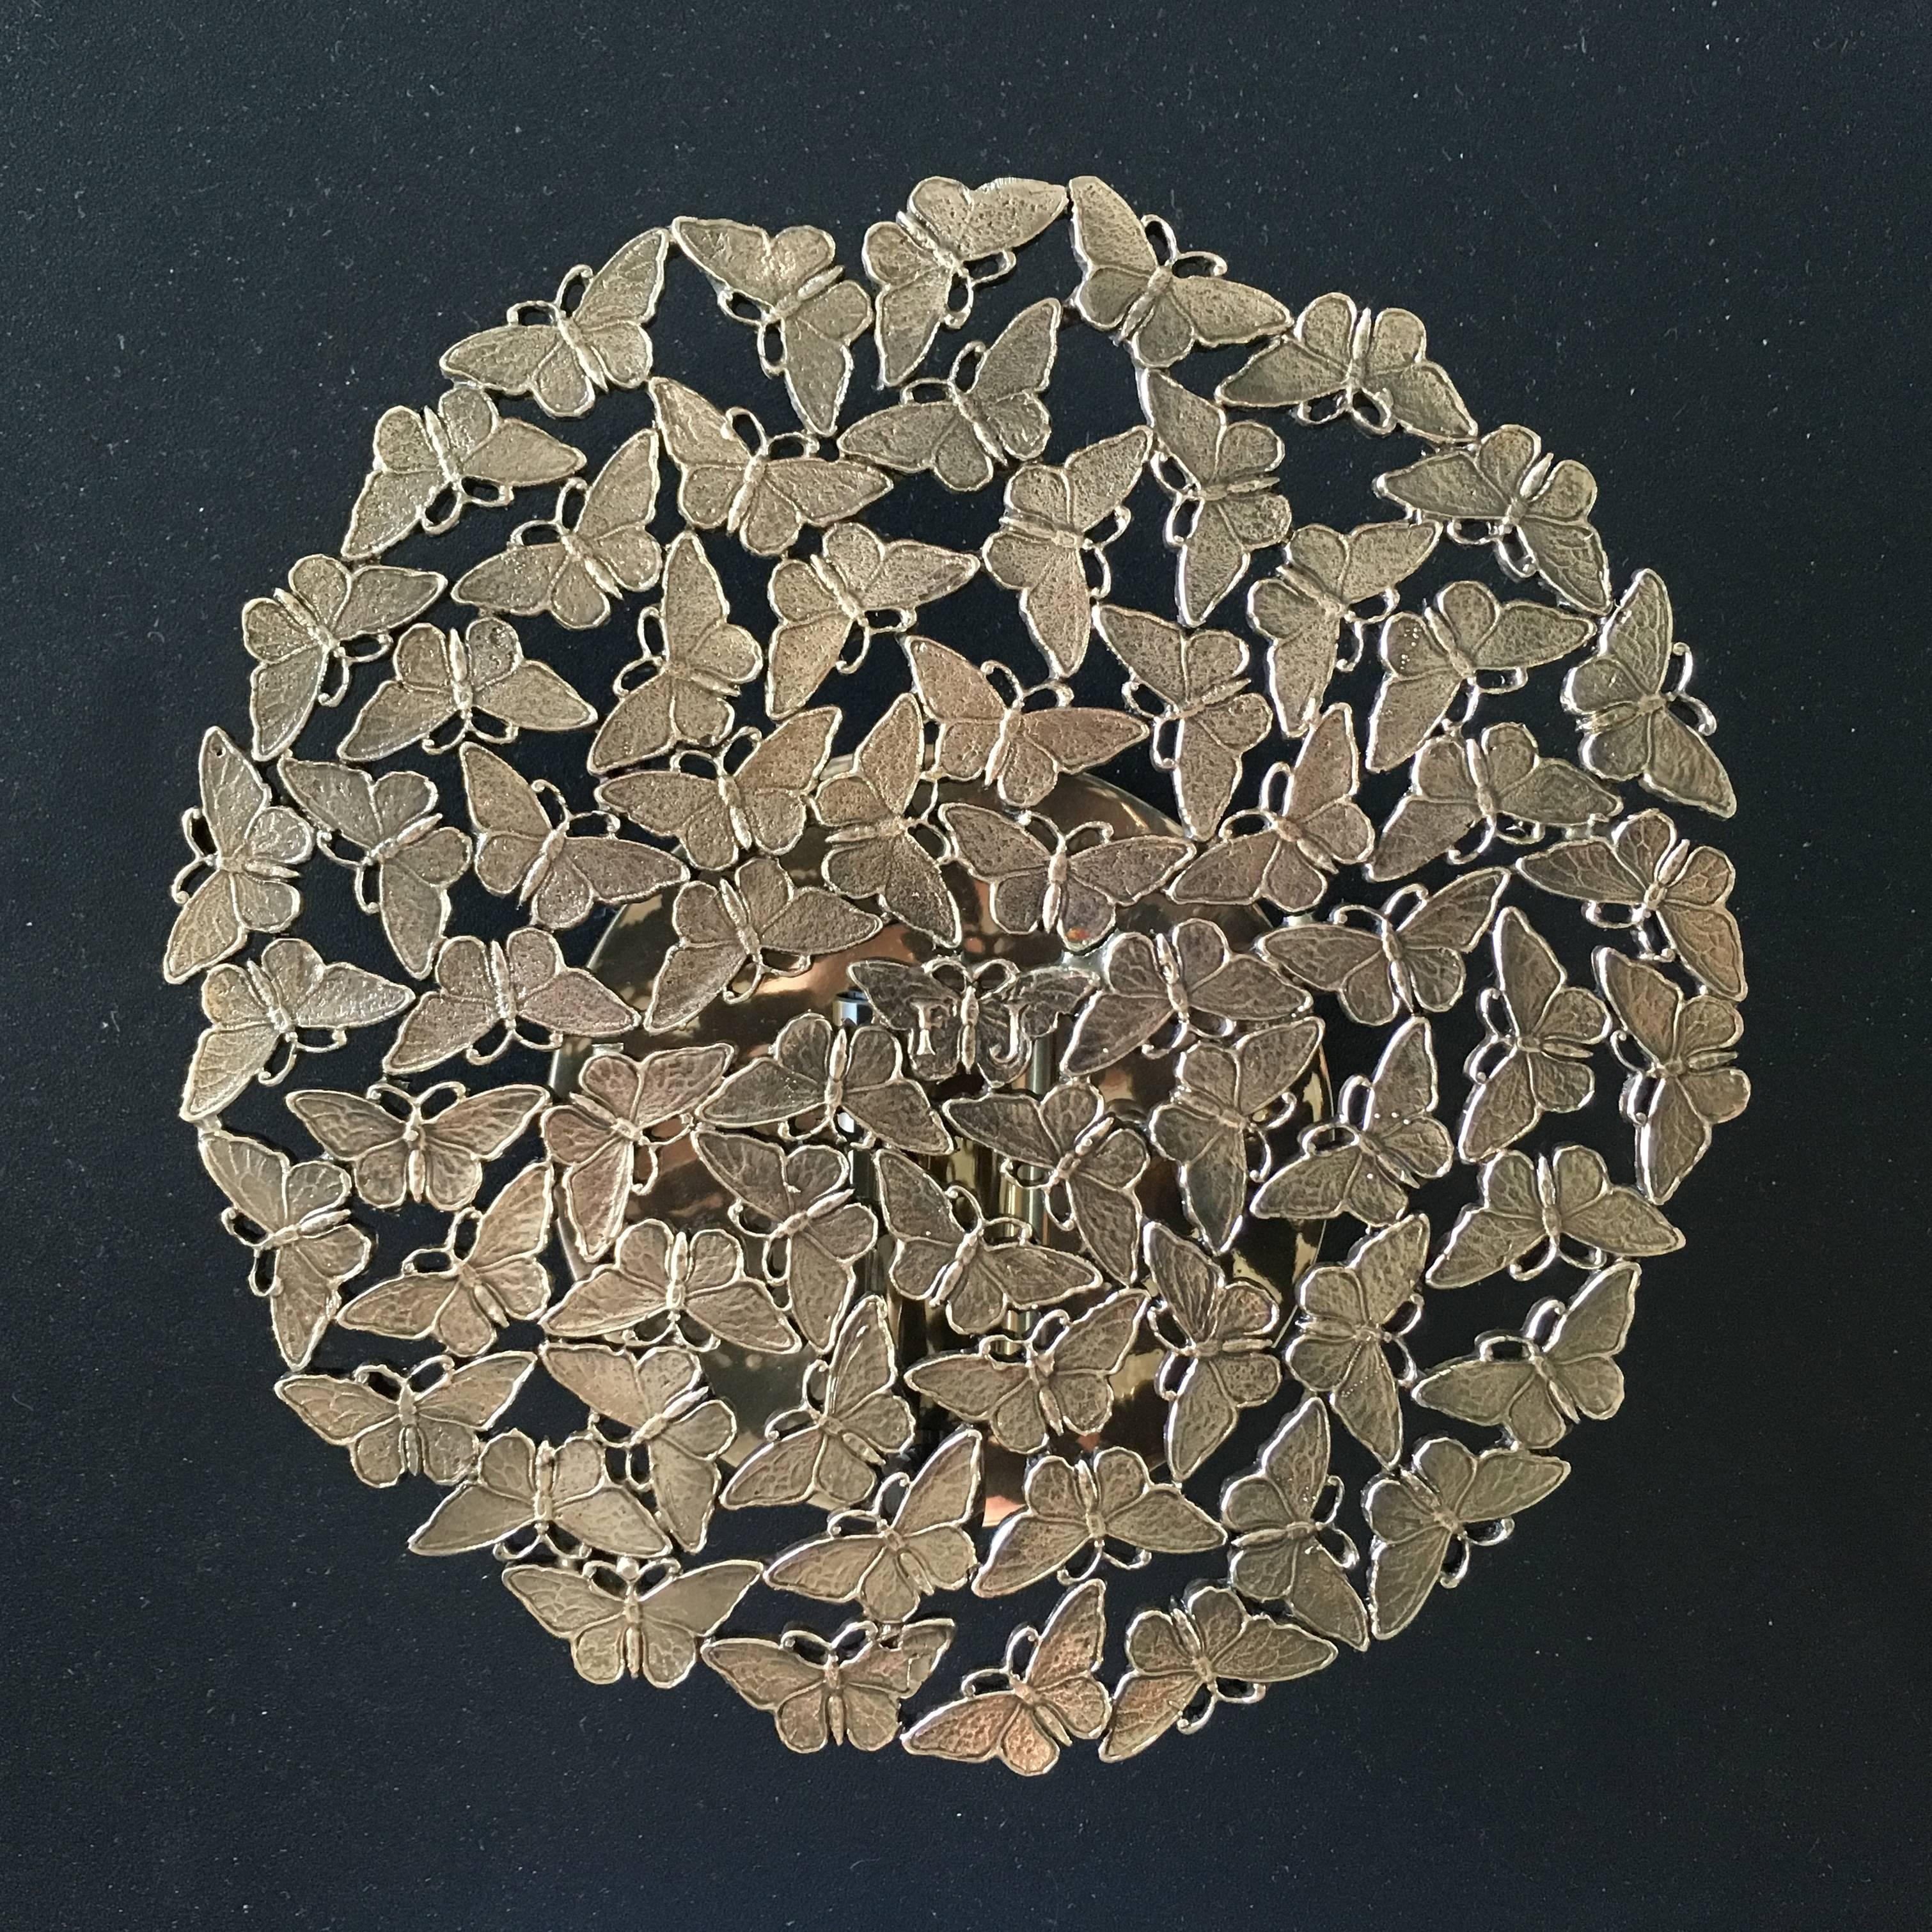 A kaleidoscope of finely handcrafted cast brass butterflies make the magic of light even more seductive combining material and ethereal in a sculptural wall sconce. Lost wax cast by master craftsmen in Tuscany, Italy.

This listing is for the bronze